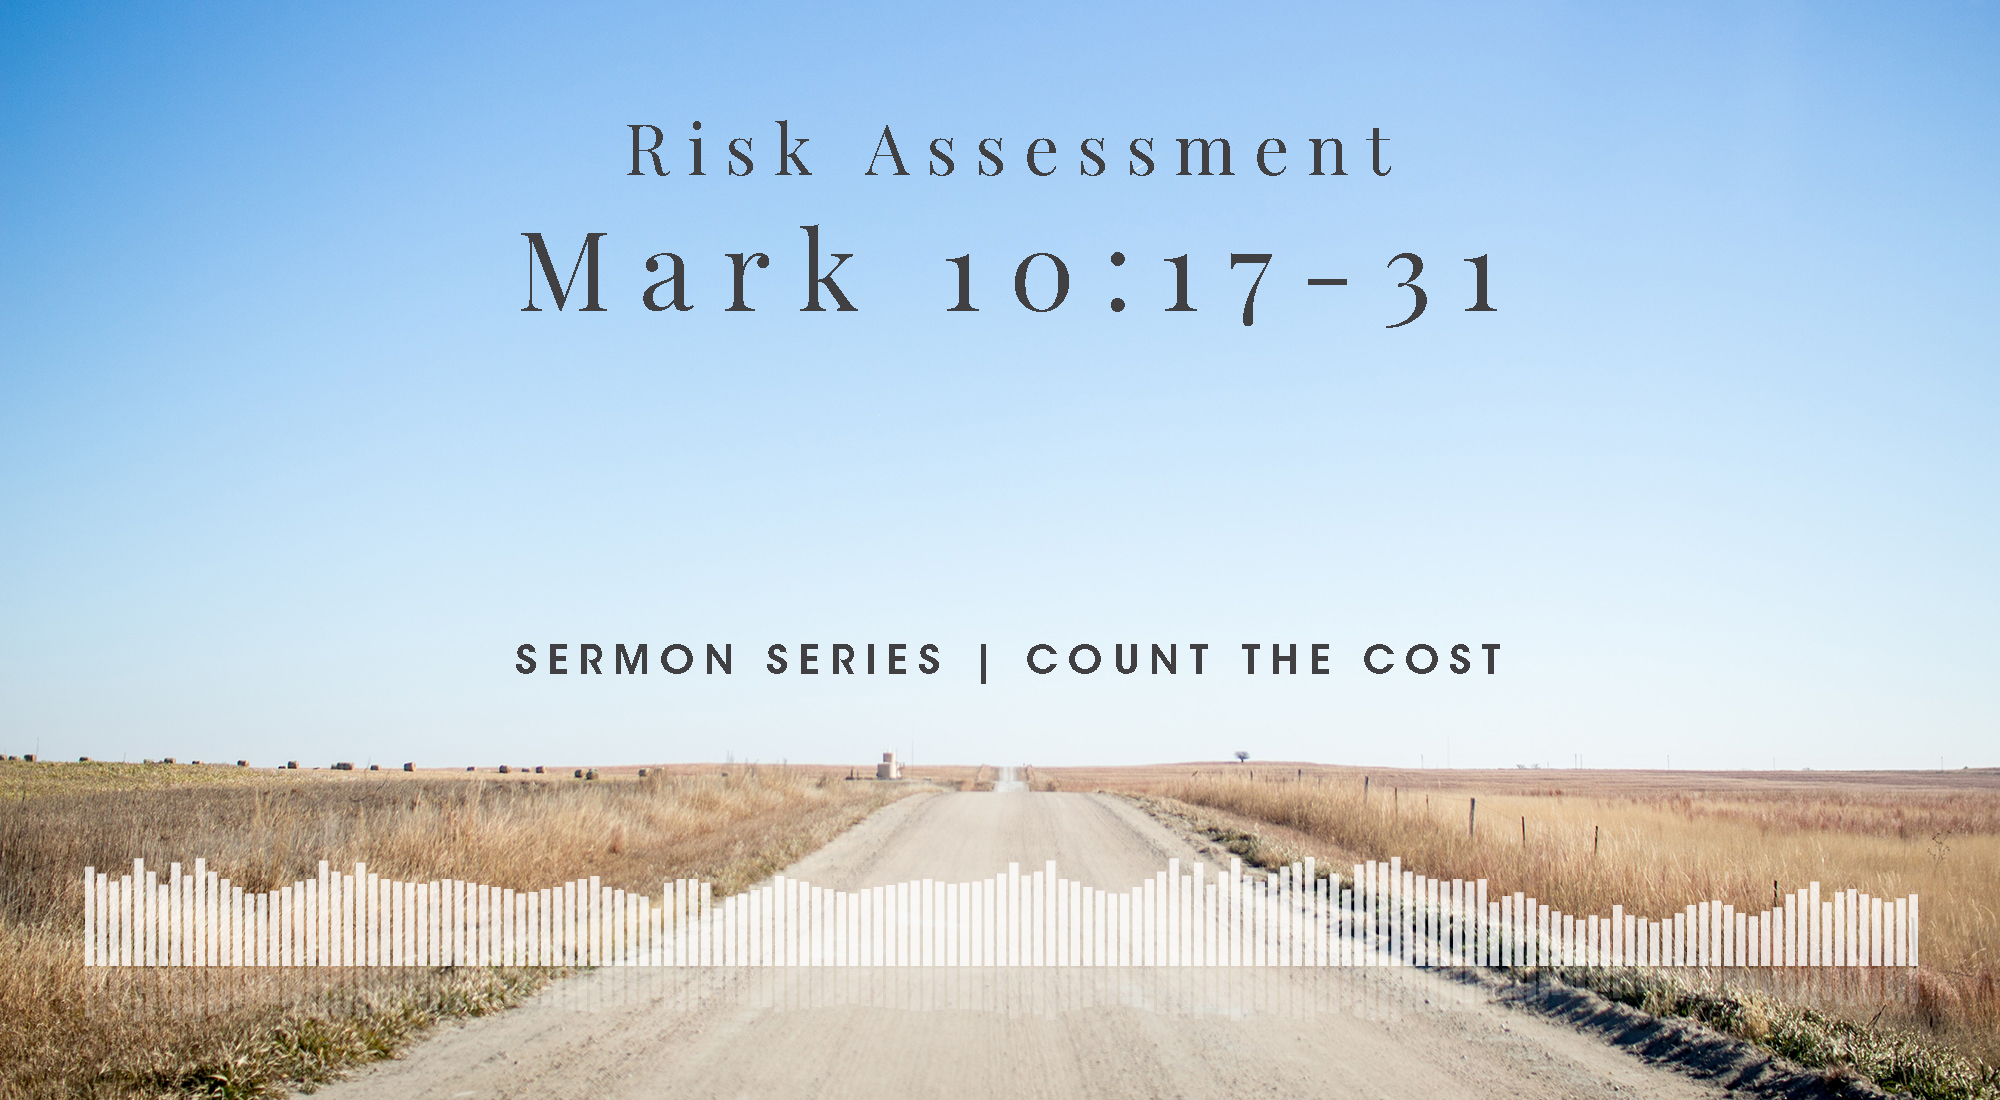 Risk Assessment, Mark 10 From Our Count The Cost Sermon Series